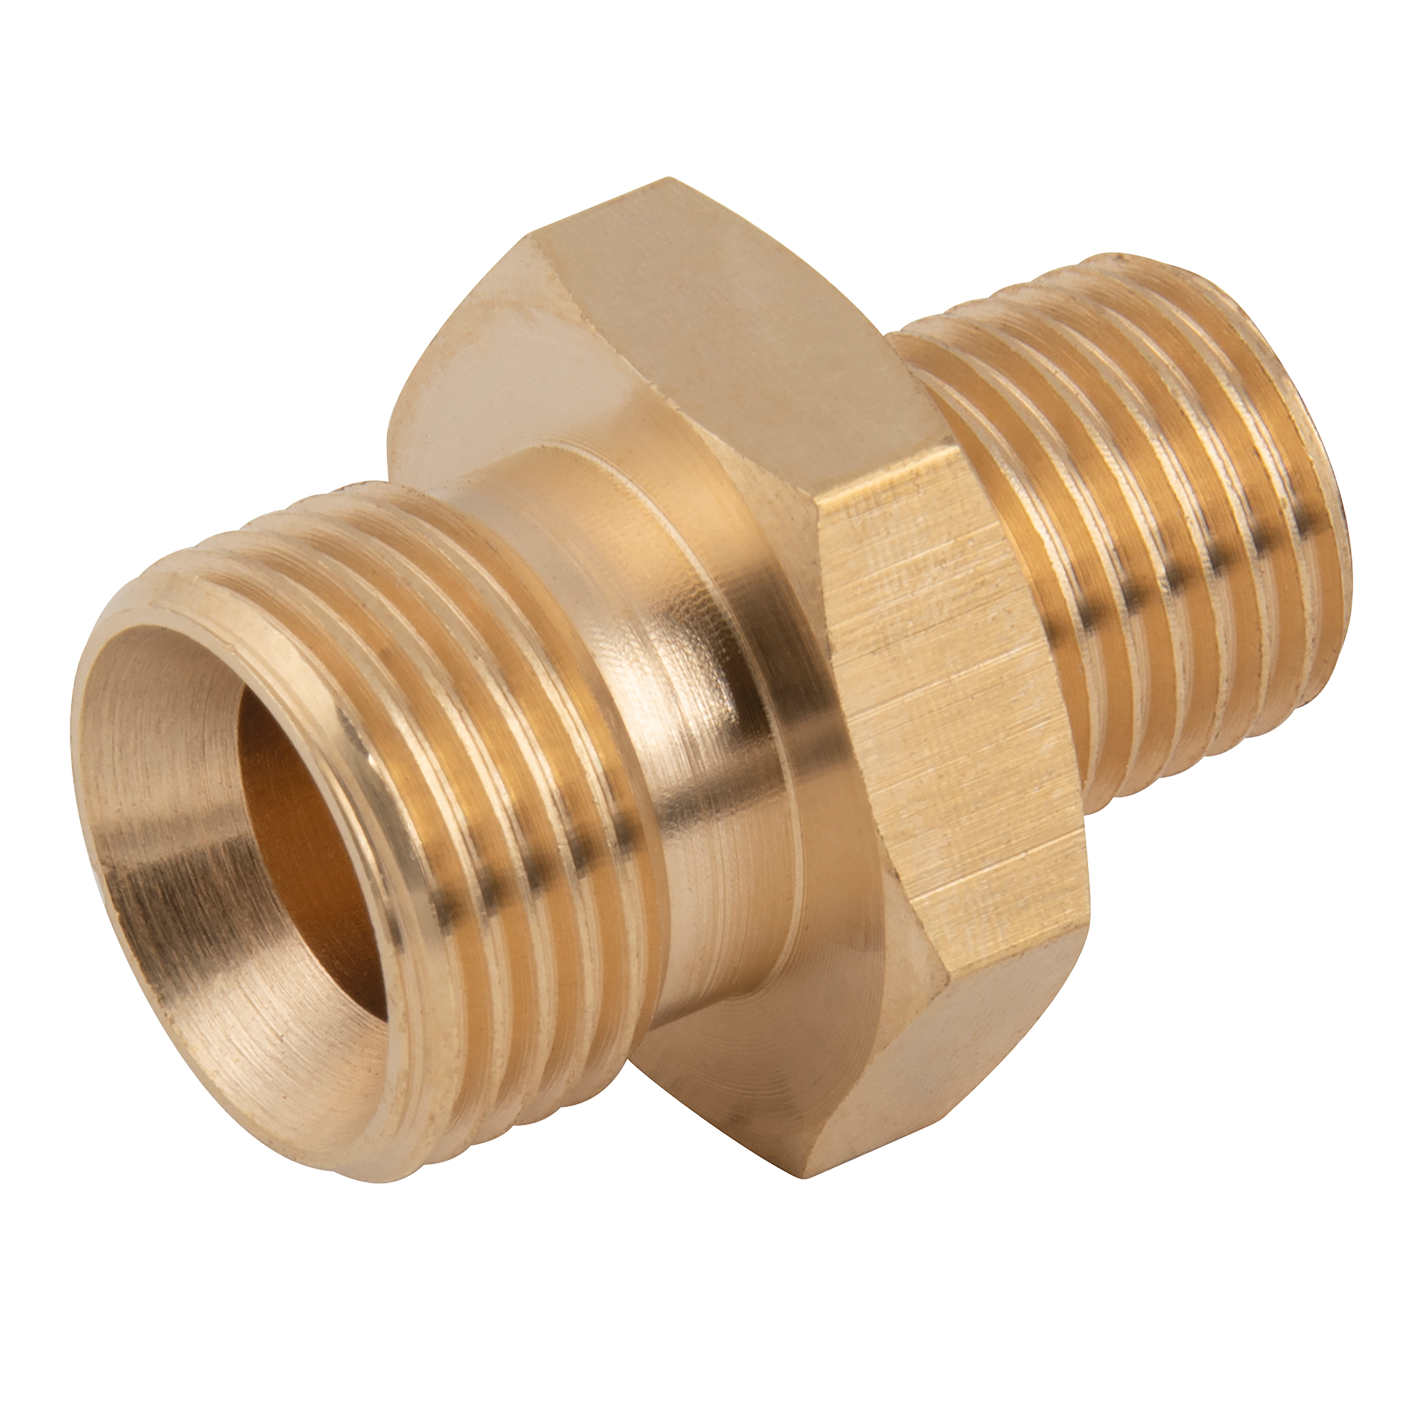 1" BSPP Male x 1/2" BSPT Male Unequal Adaptor